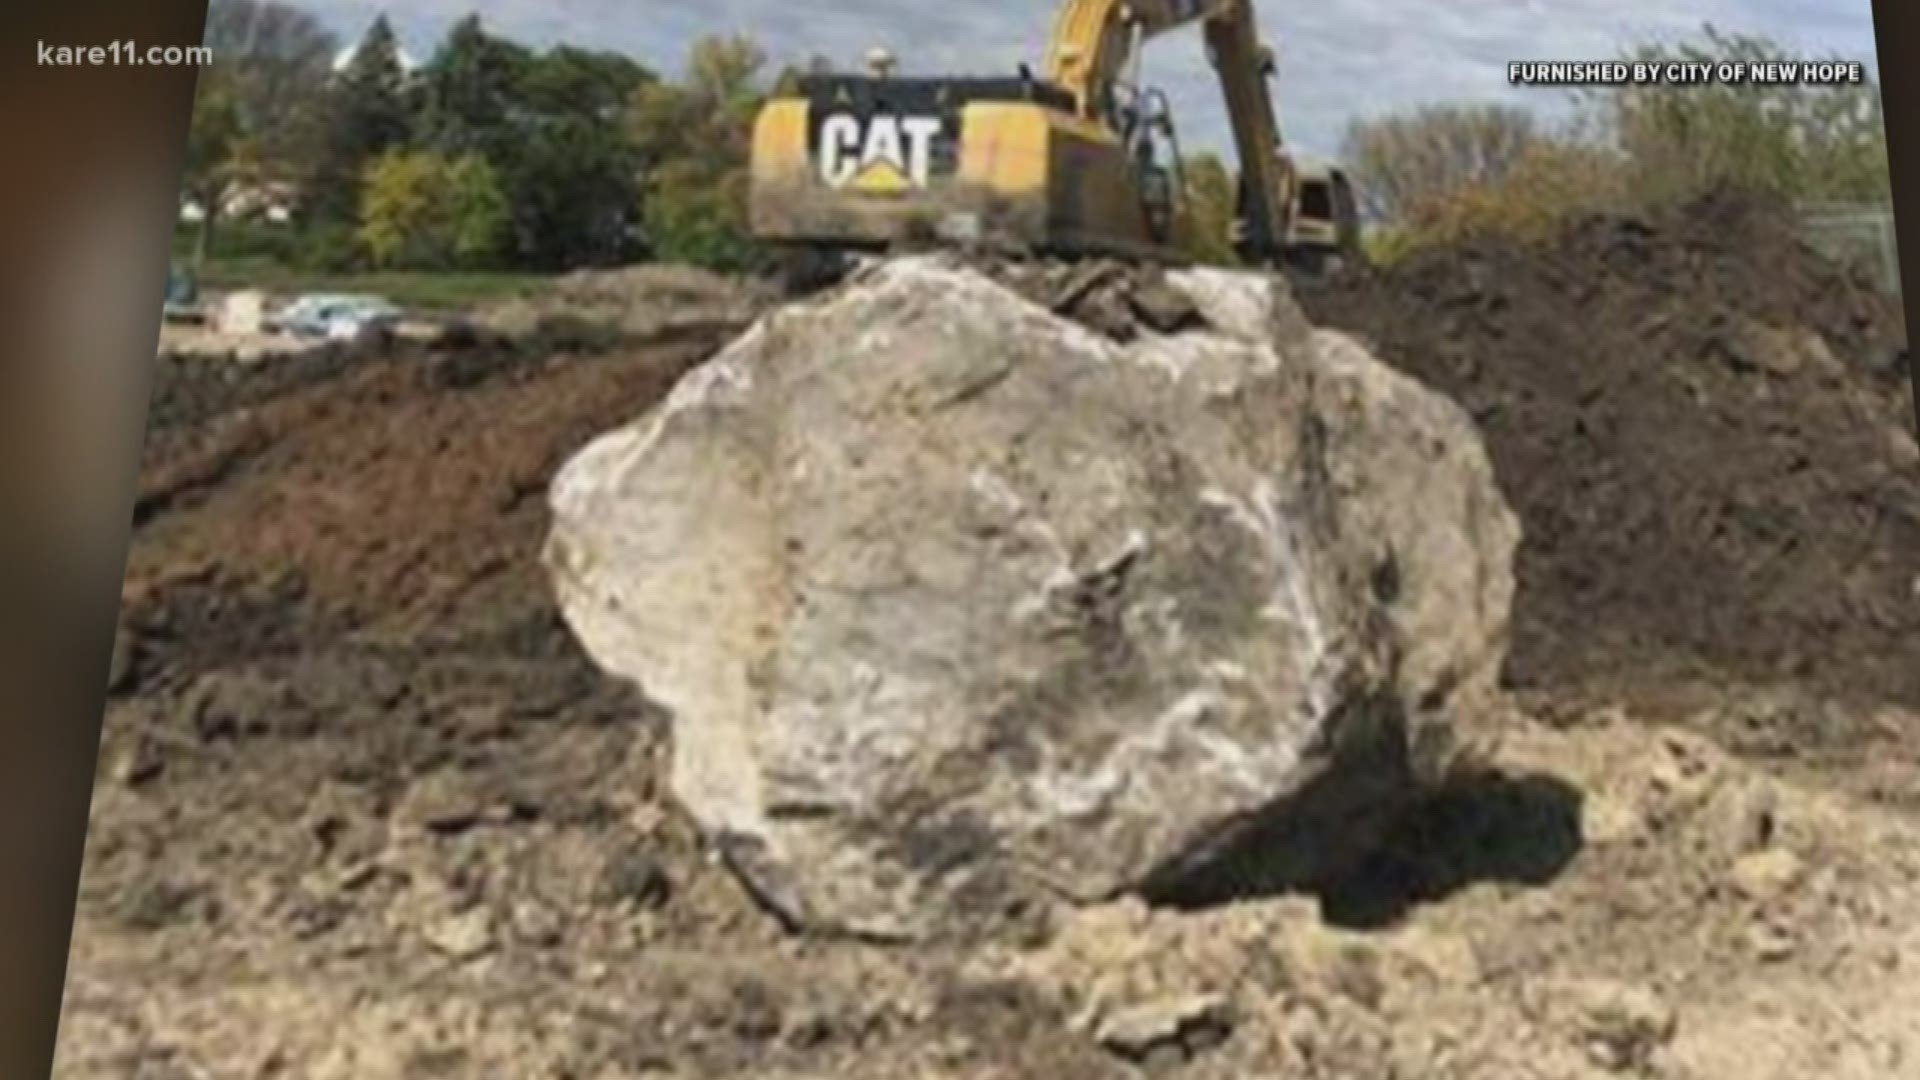 A boulder that weighs at least 100,000 lbs is getting in the way of a construction project in New Hope. City officials say they want to get rid of it.